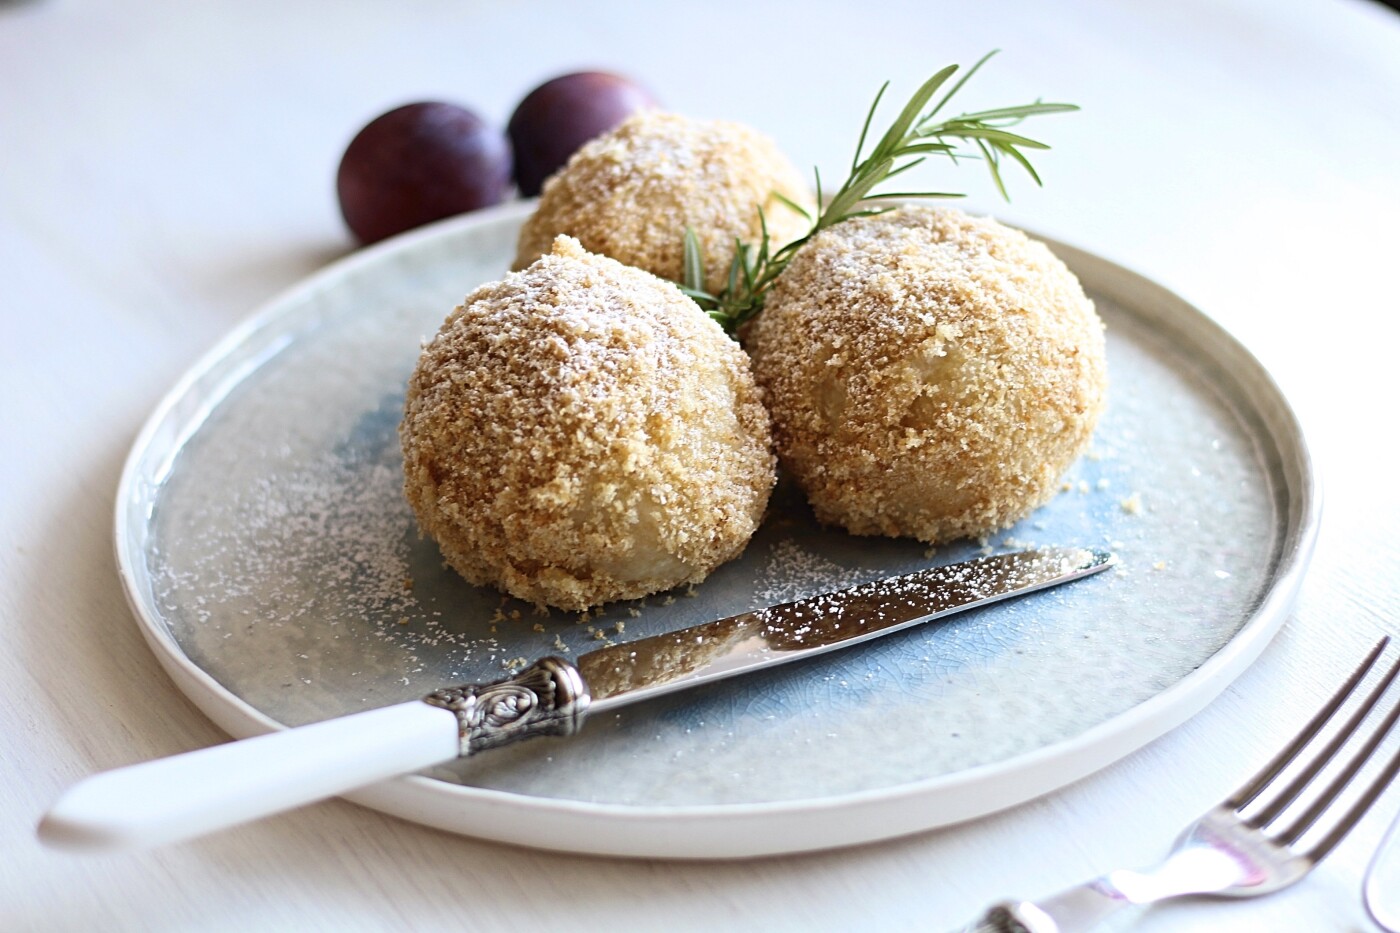 Gaumenschmaus loves vegan cuisine. This pic shows vegan dumplings with poppy-seed, plum filling. Anyone else, who would love this?